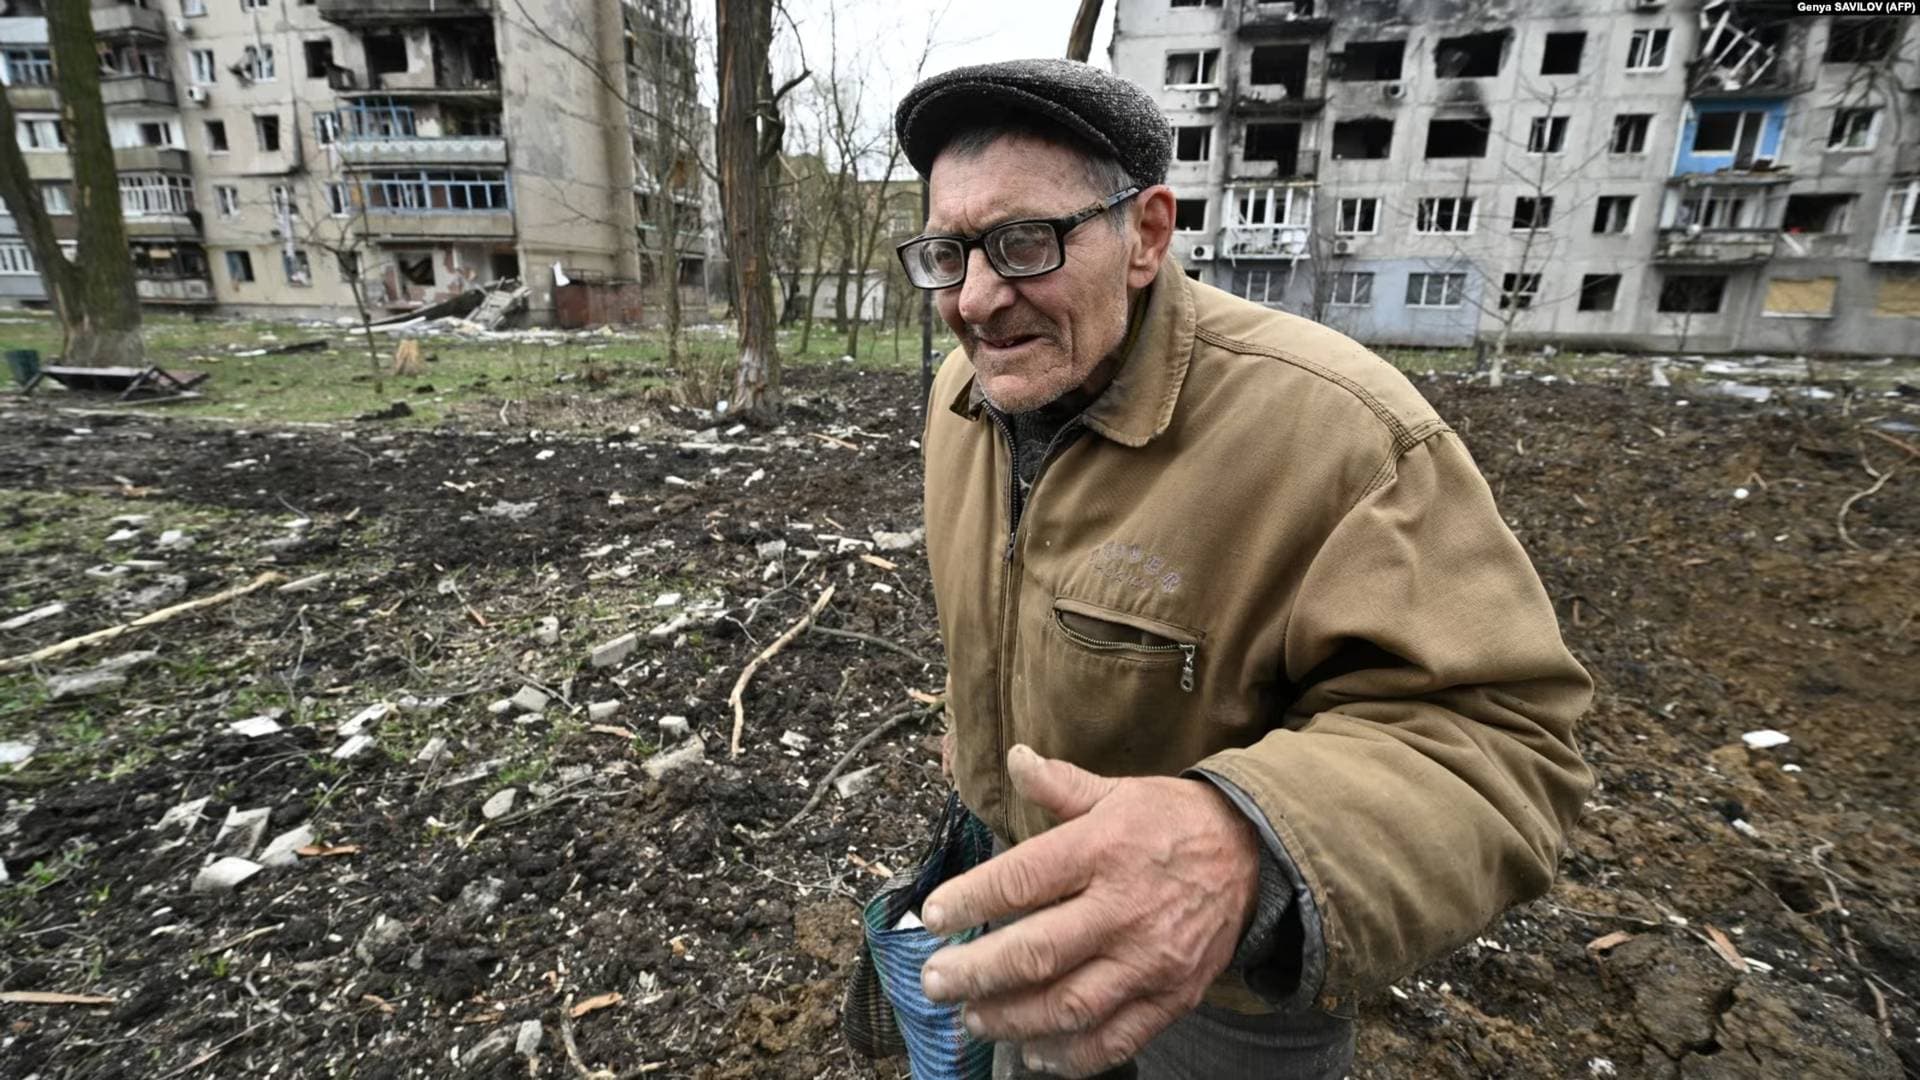 Grozdov is one of the residents who chose to remain in the burnt-out shell of the former town